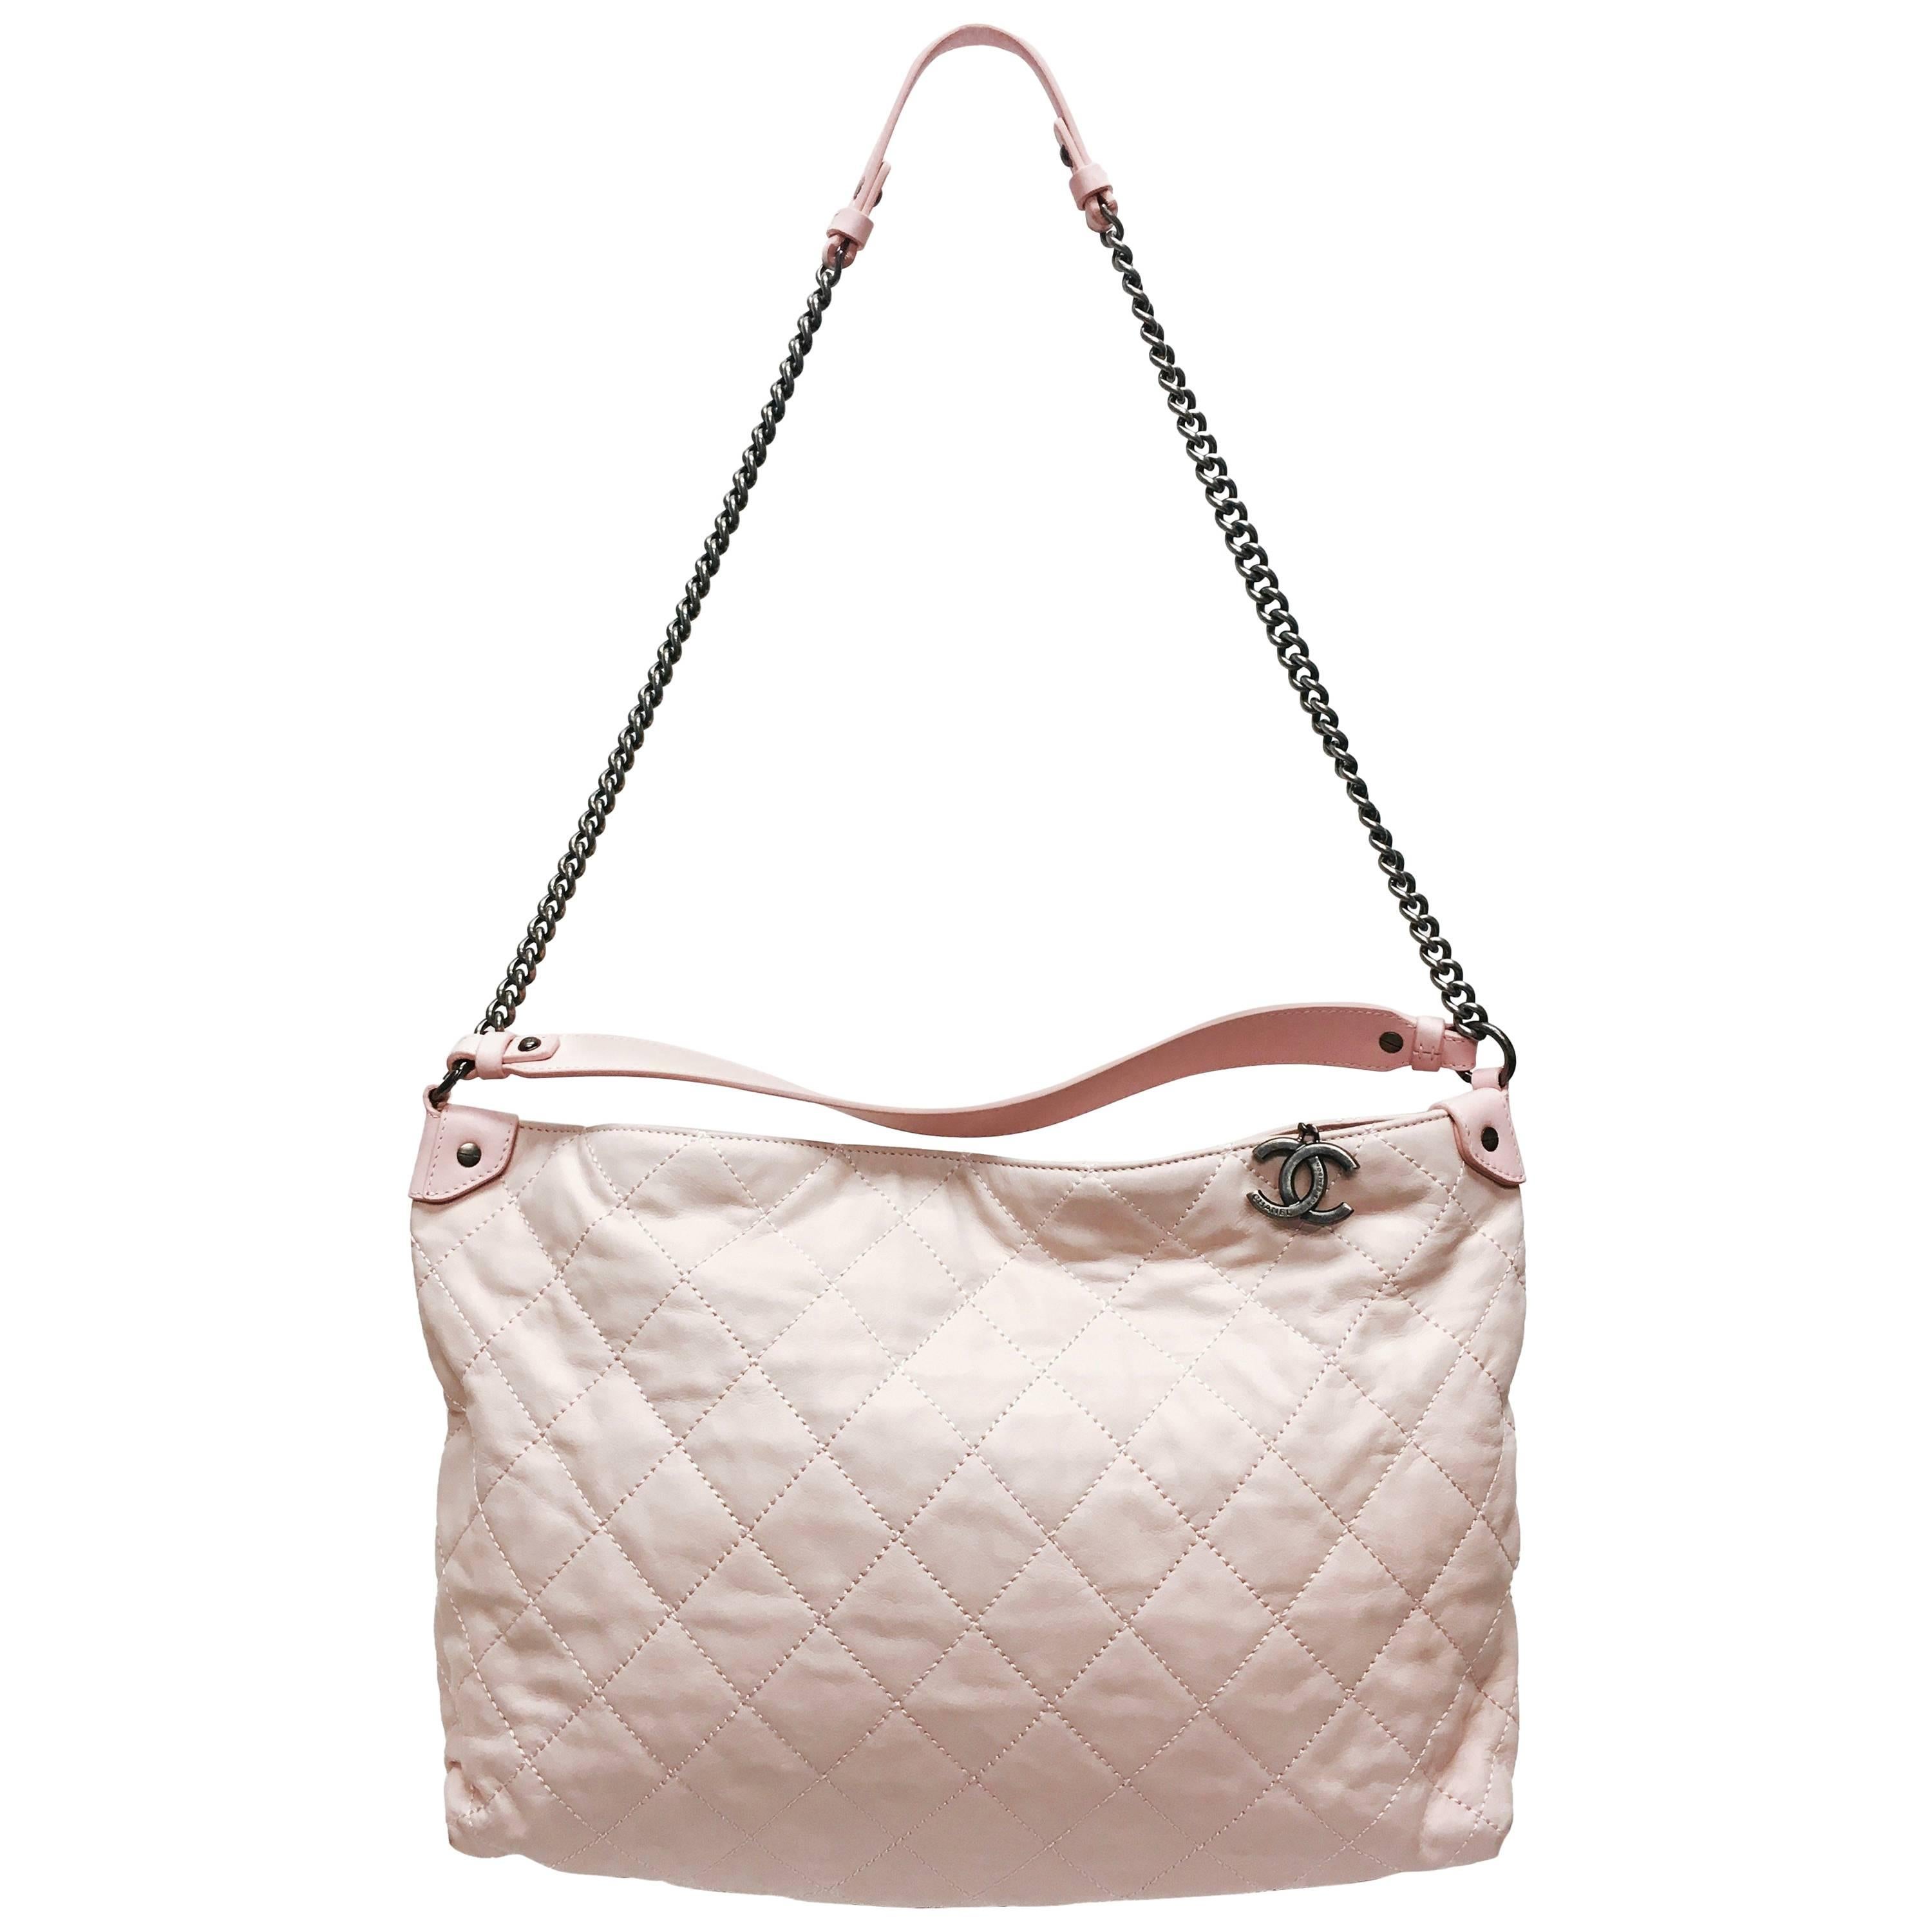 CHANEL Light Pink Quilted Calfskin Leather Coco hobo bag from the 13C collection. Relaxed and versatile design is perfect for casual luxury. This bag features a long ruthenium chain strap for hands-free wear with a leather shoulder strap and a